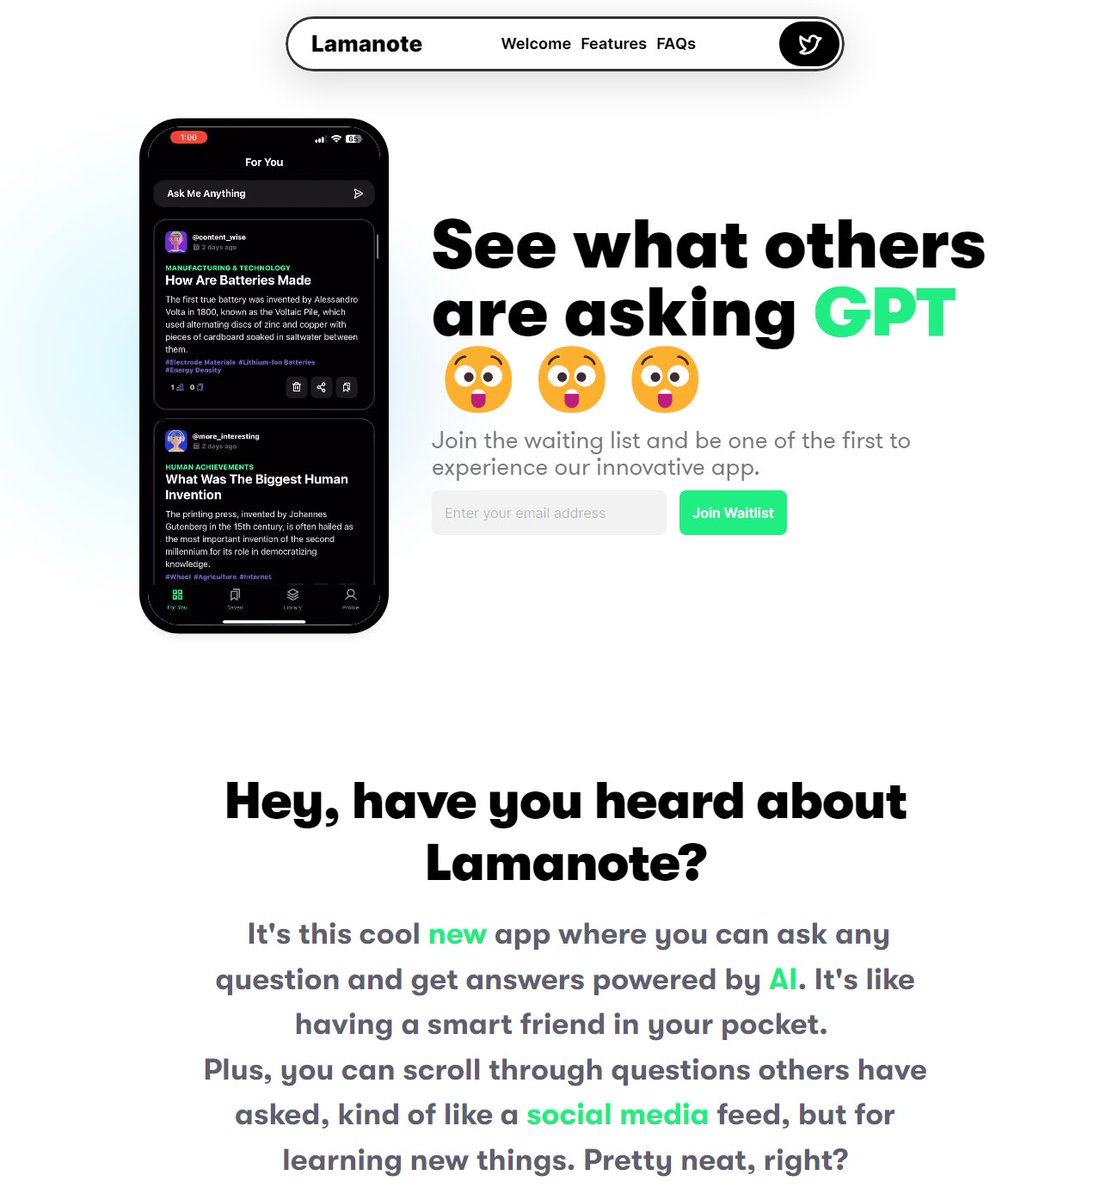 AI Tool of the Day: Lamanote Hey, have you heard about Lamanote? It's this cool new app where you can ask any question and get answers powered by AI. ai-search.io/tool/lamanote #ai #aitools #chatGPT #GPT4 #Study #Education #Studylog #EducationForAll #EducationMatters